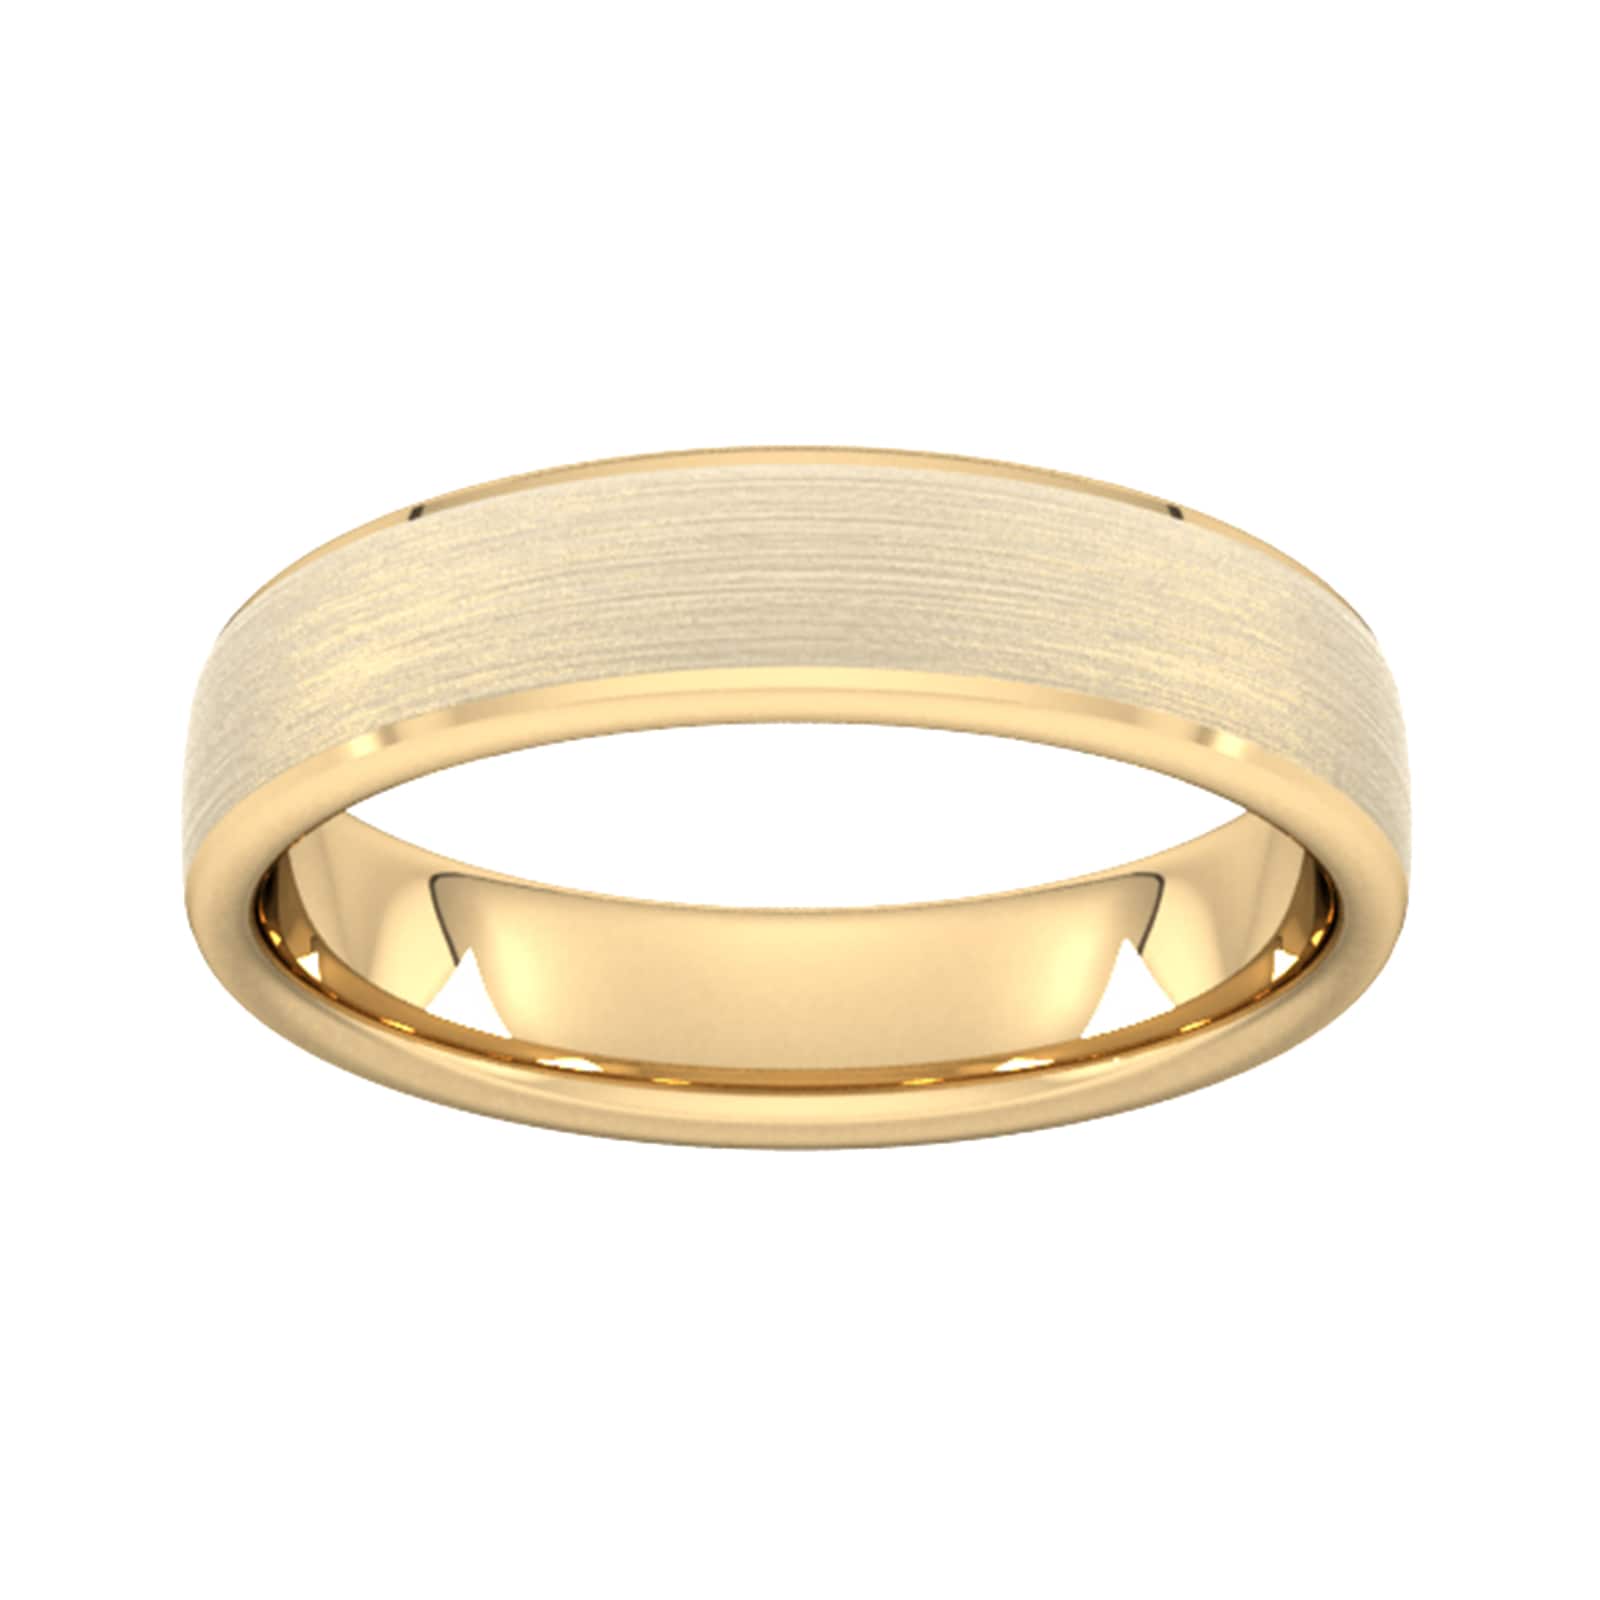 5mm Traditional Court Standard Polished Chamfered Edges With Matt Centre Wedding Ring In 9 Carat Yellow Gold - Ring Size W